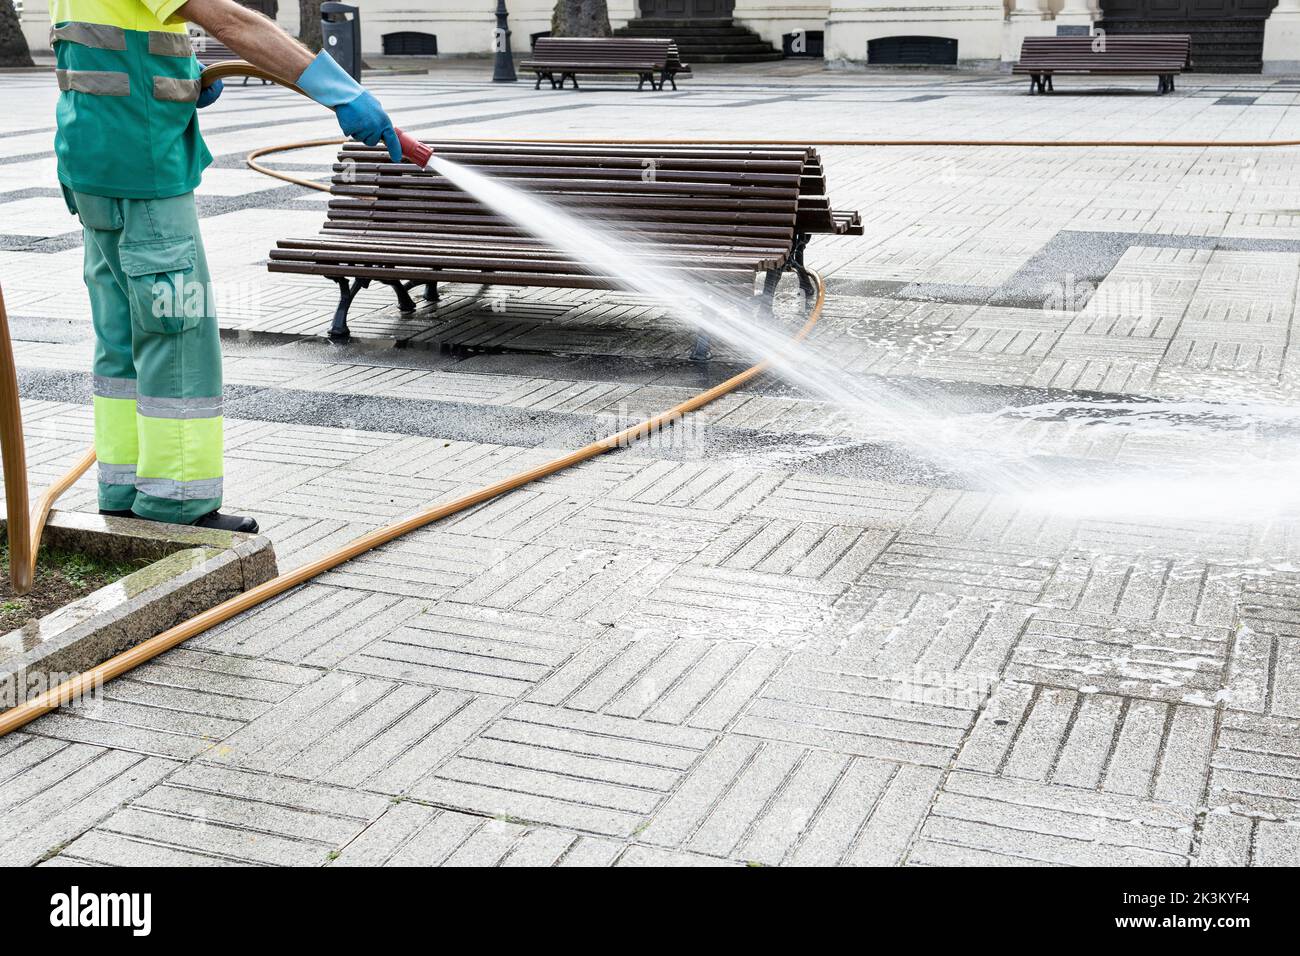 Sweeper cleaning a public park with water using a hosepipe. Public maintenance concept. Copy space Stock Photo